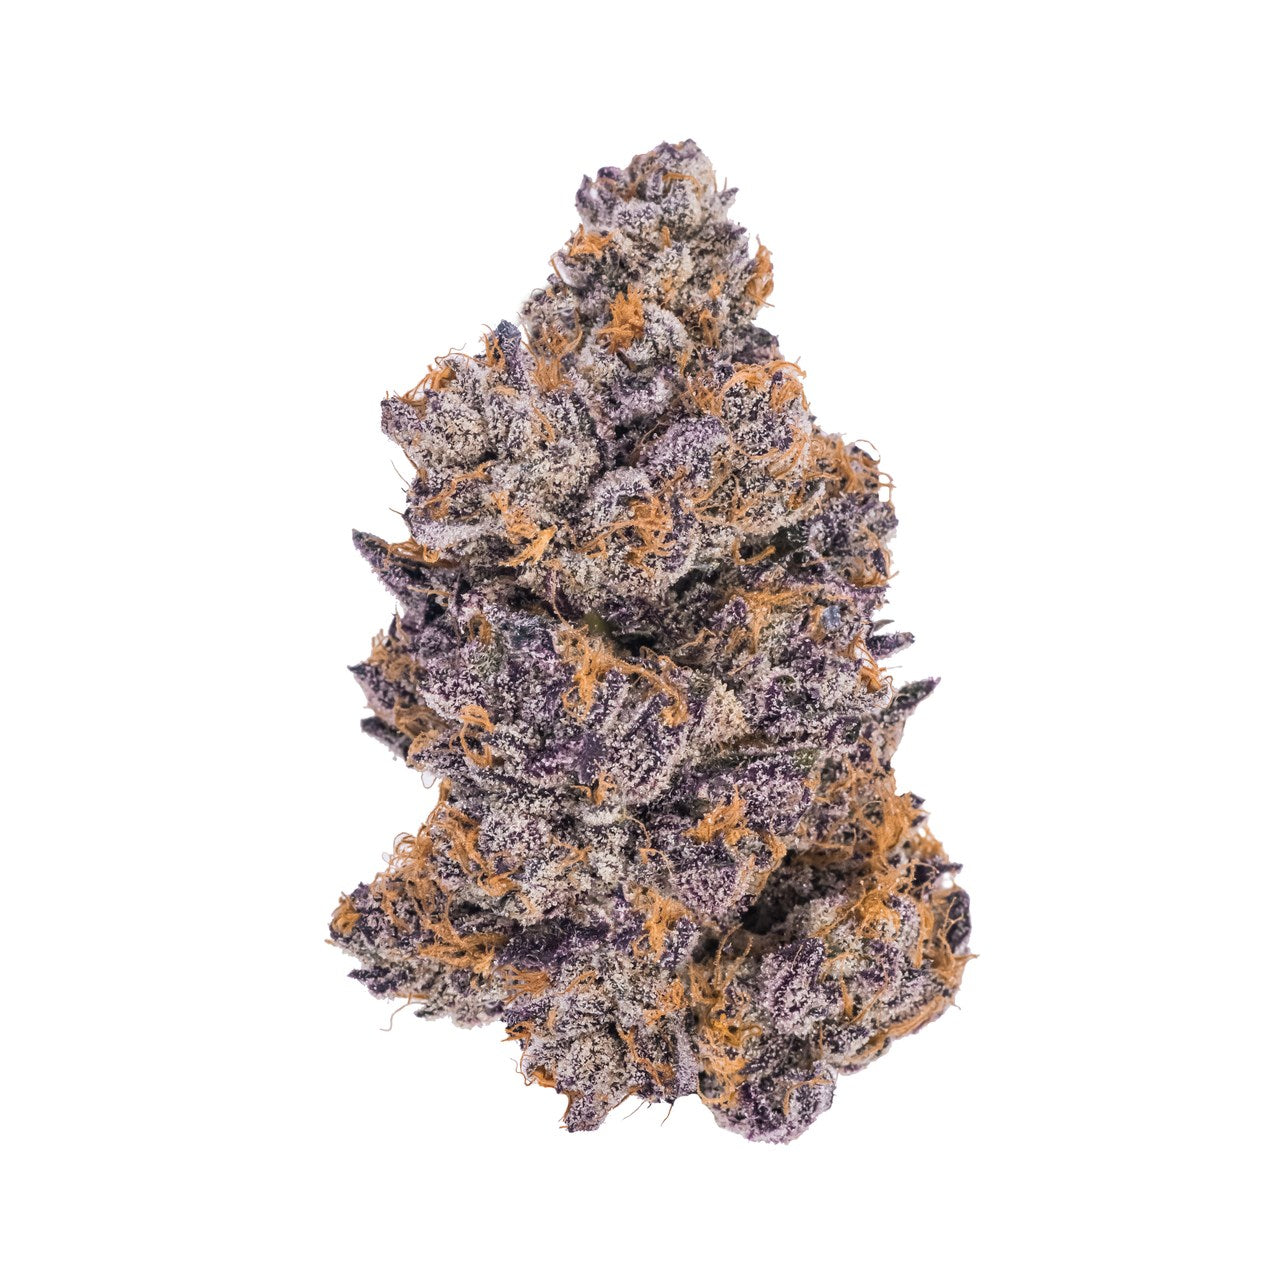 A nug of cannabis flower from the Jealousy strain of weed sits against a white backdrop.